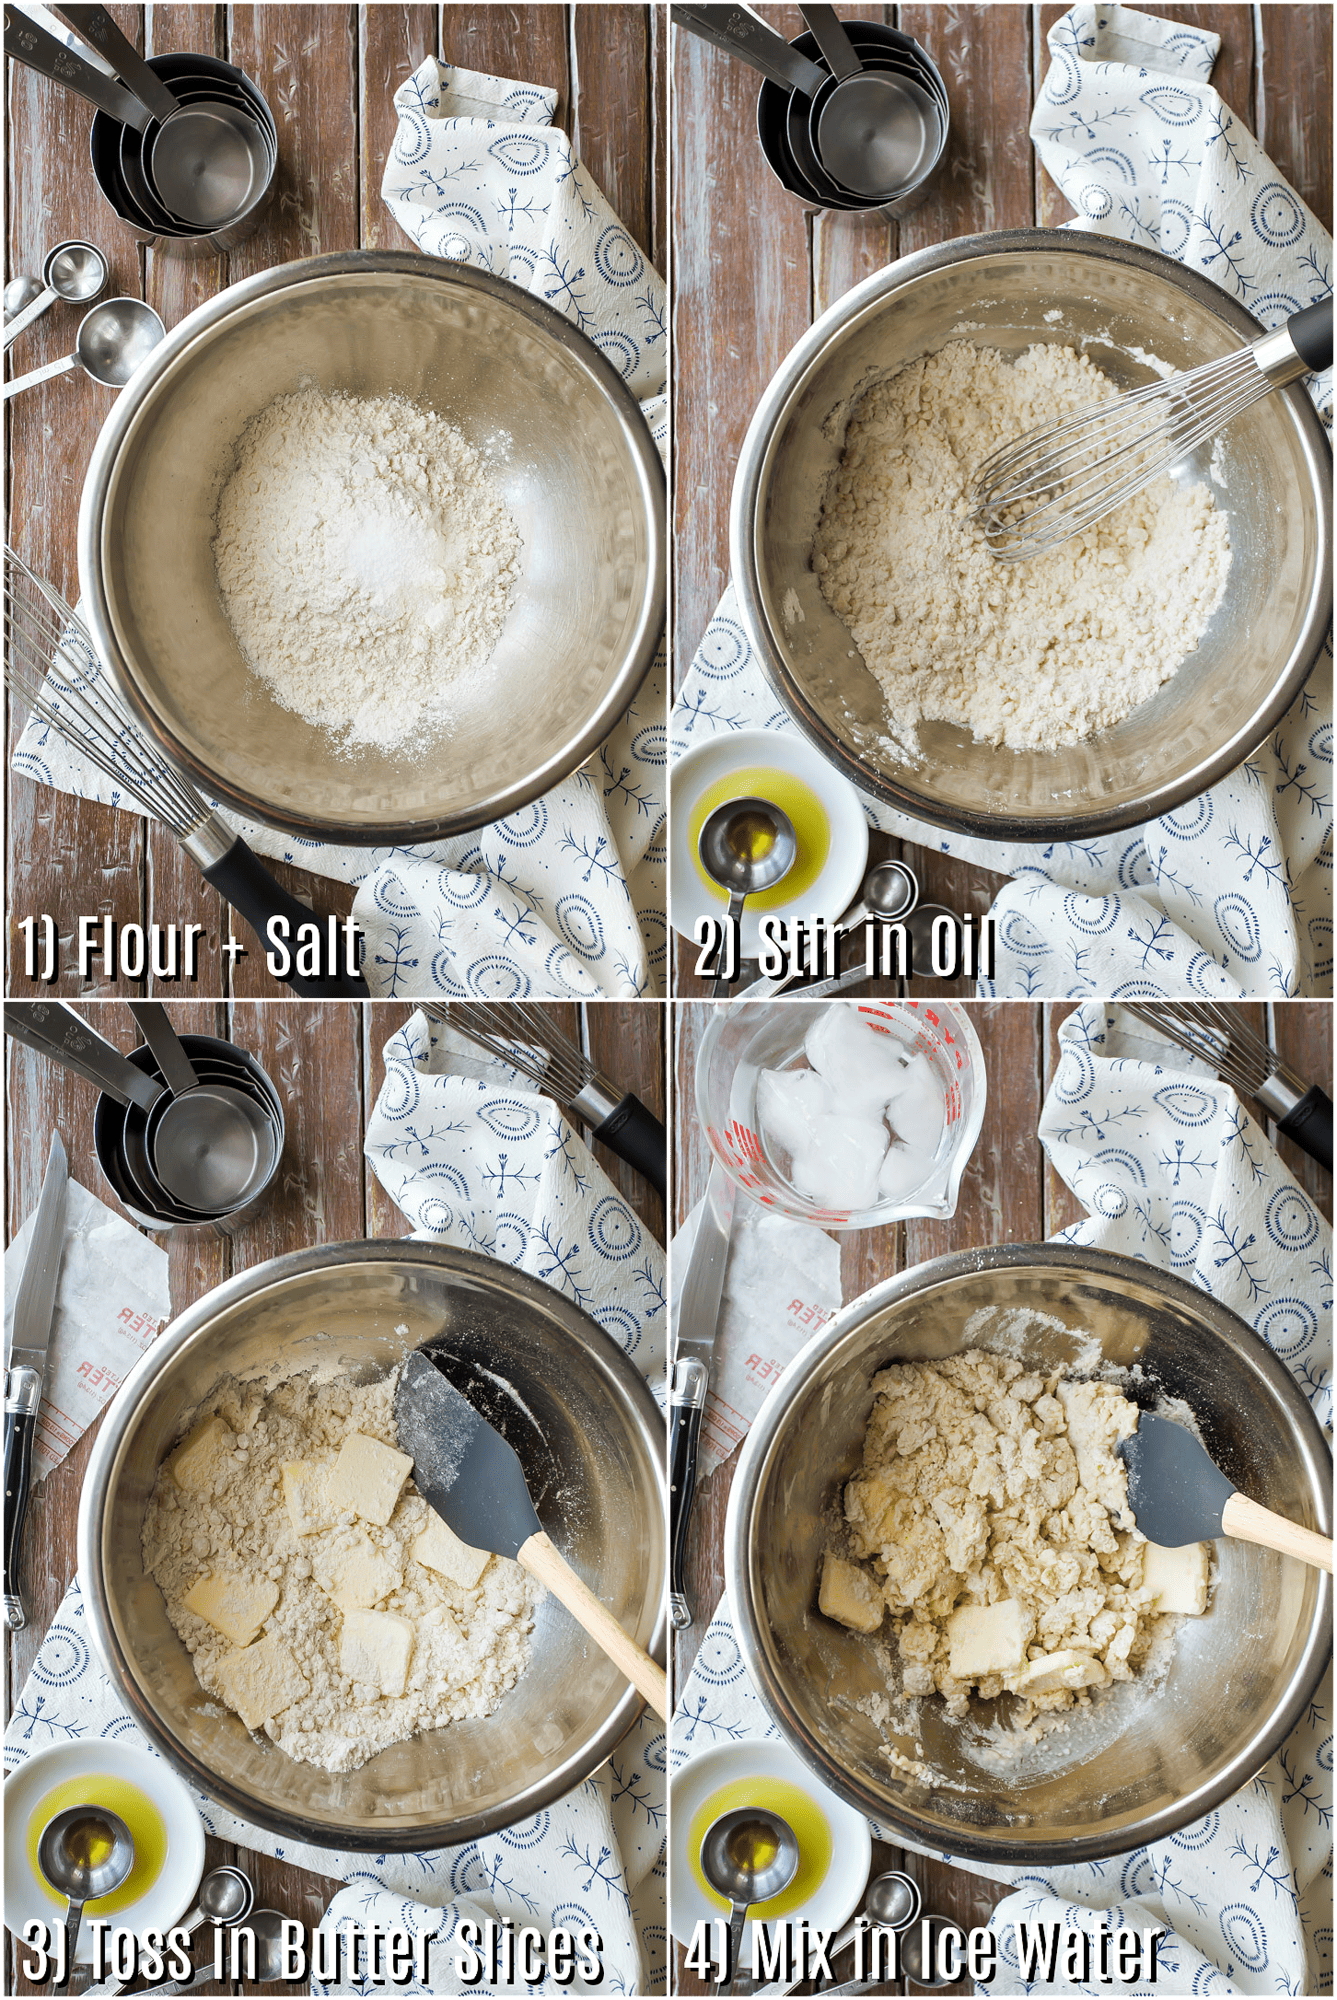 Image collage showing the steps to make pie crust dough.